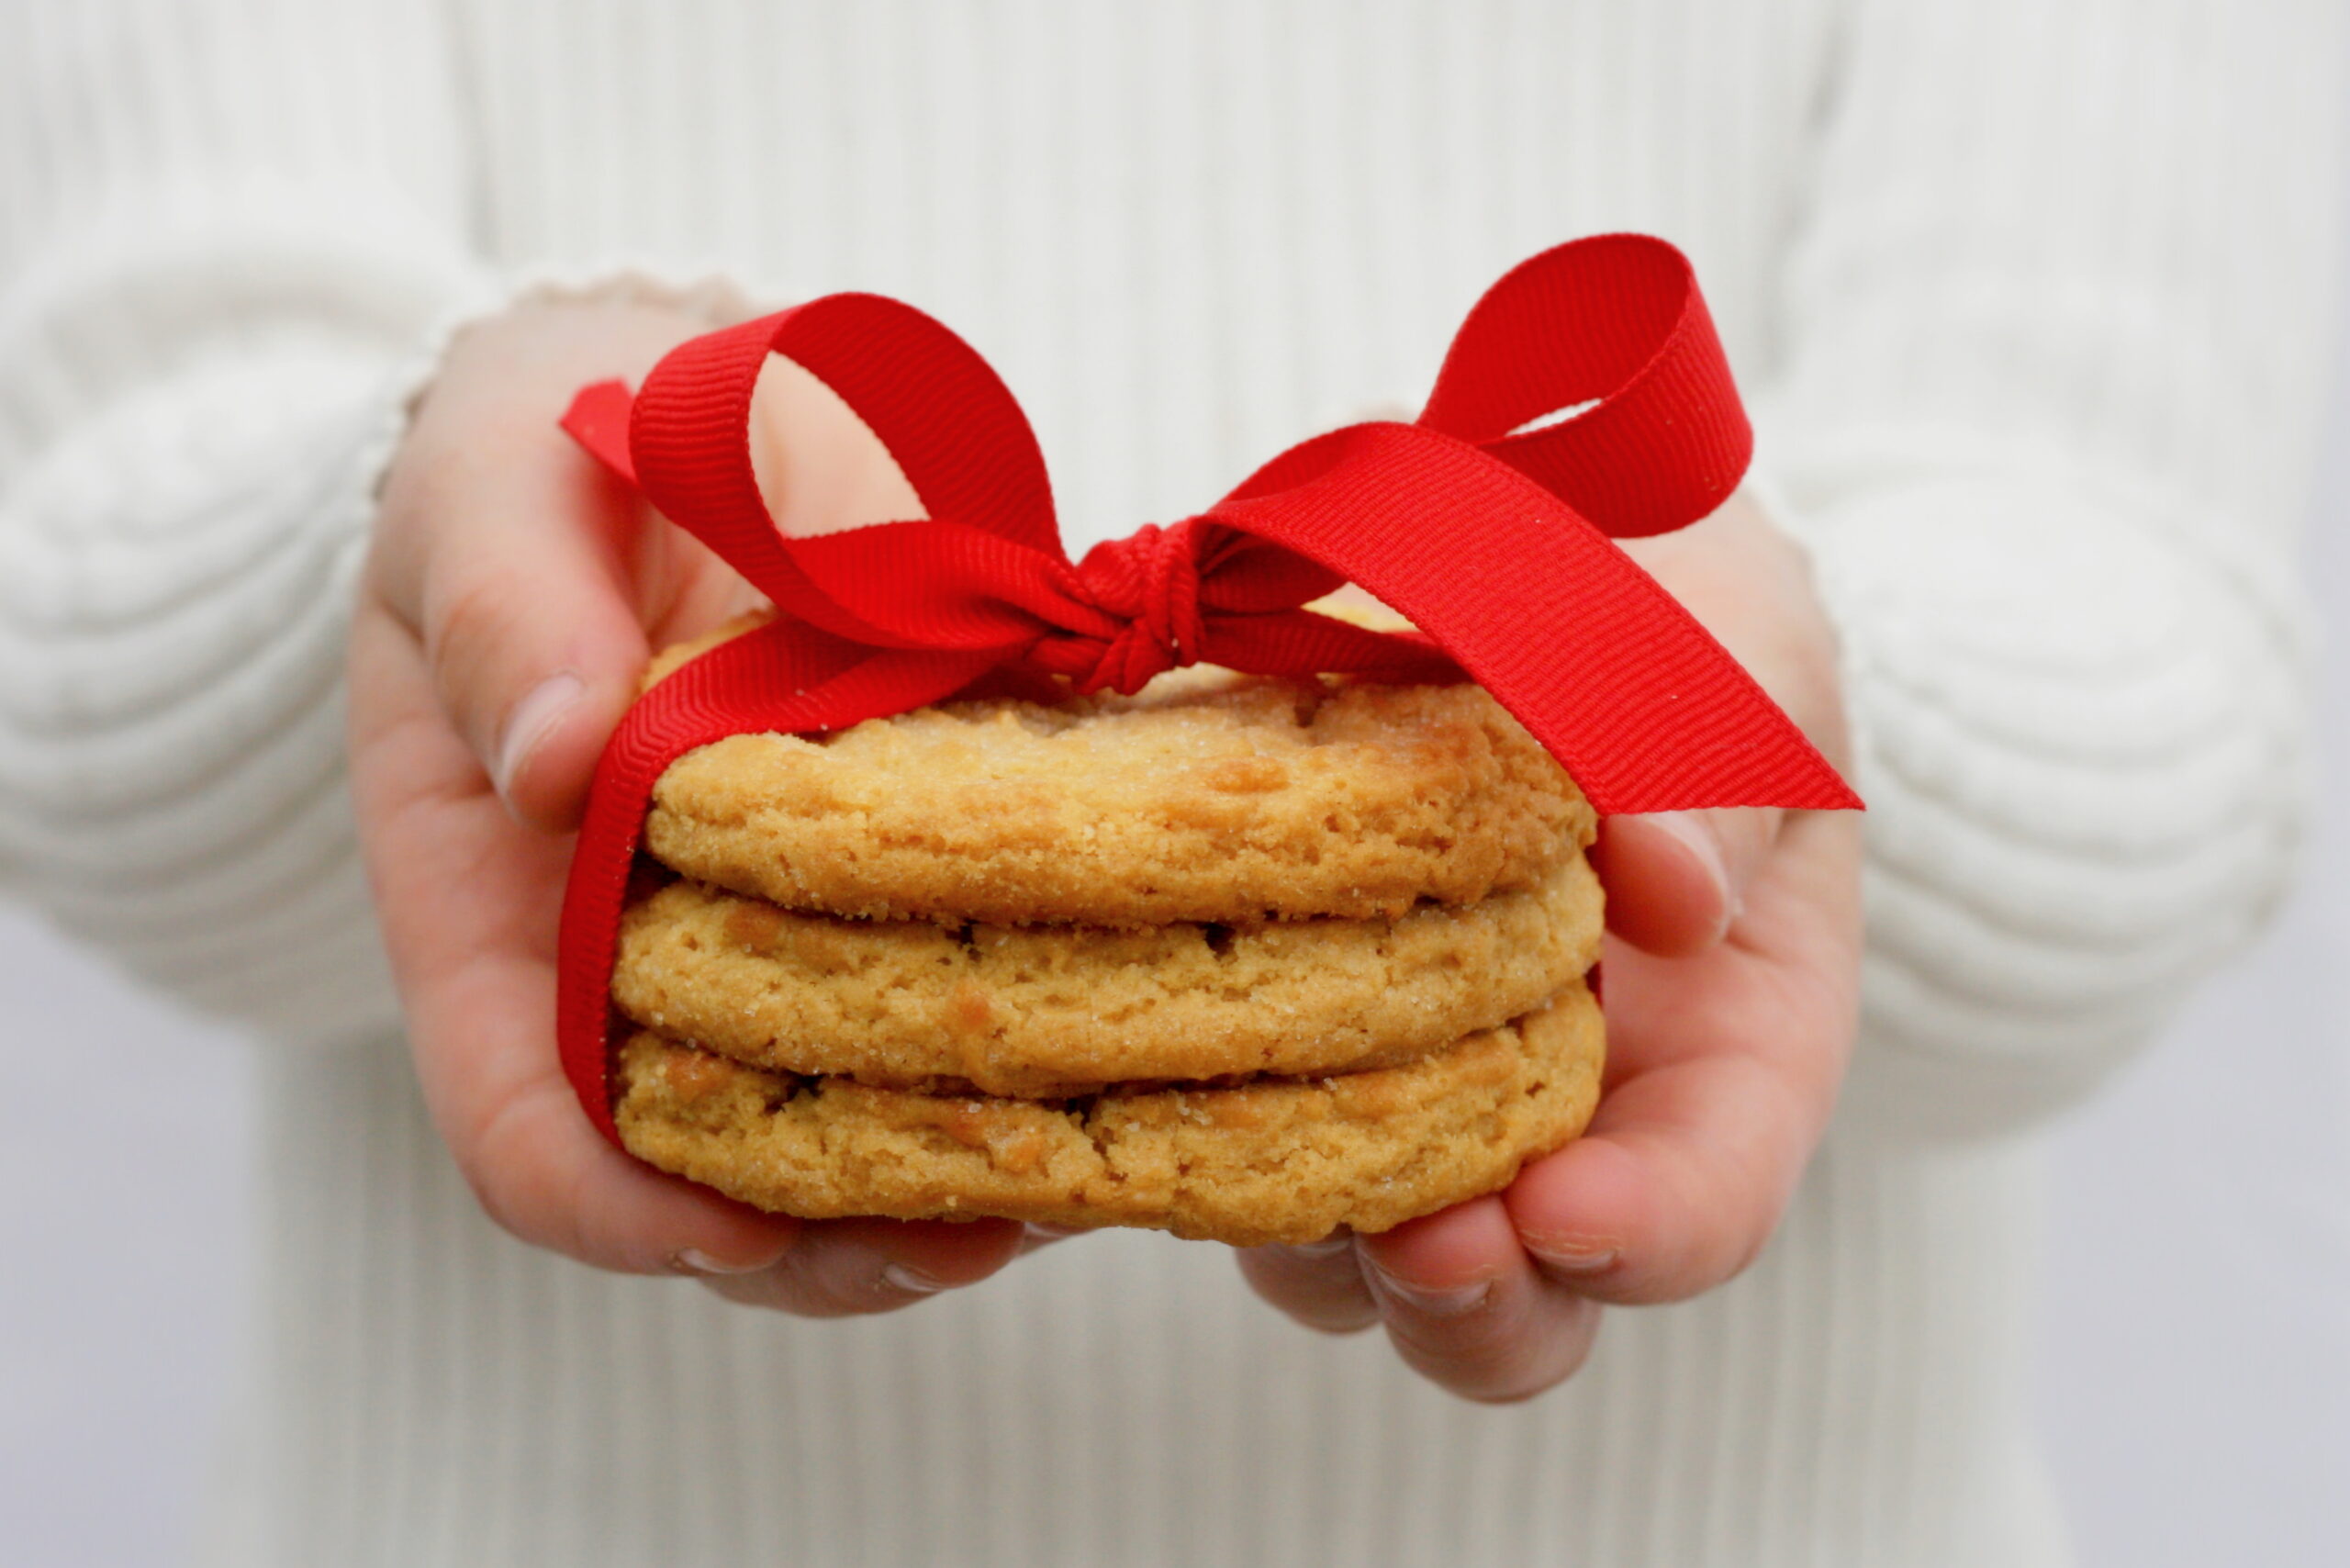 Cookies wrapped in a red bow